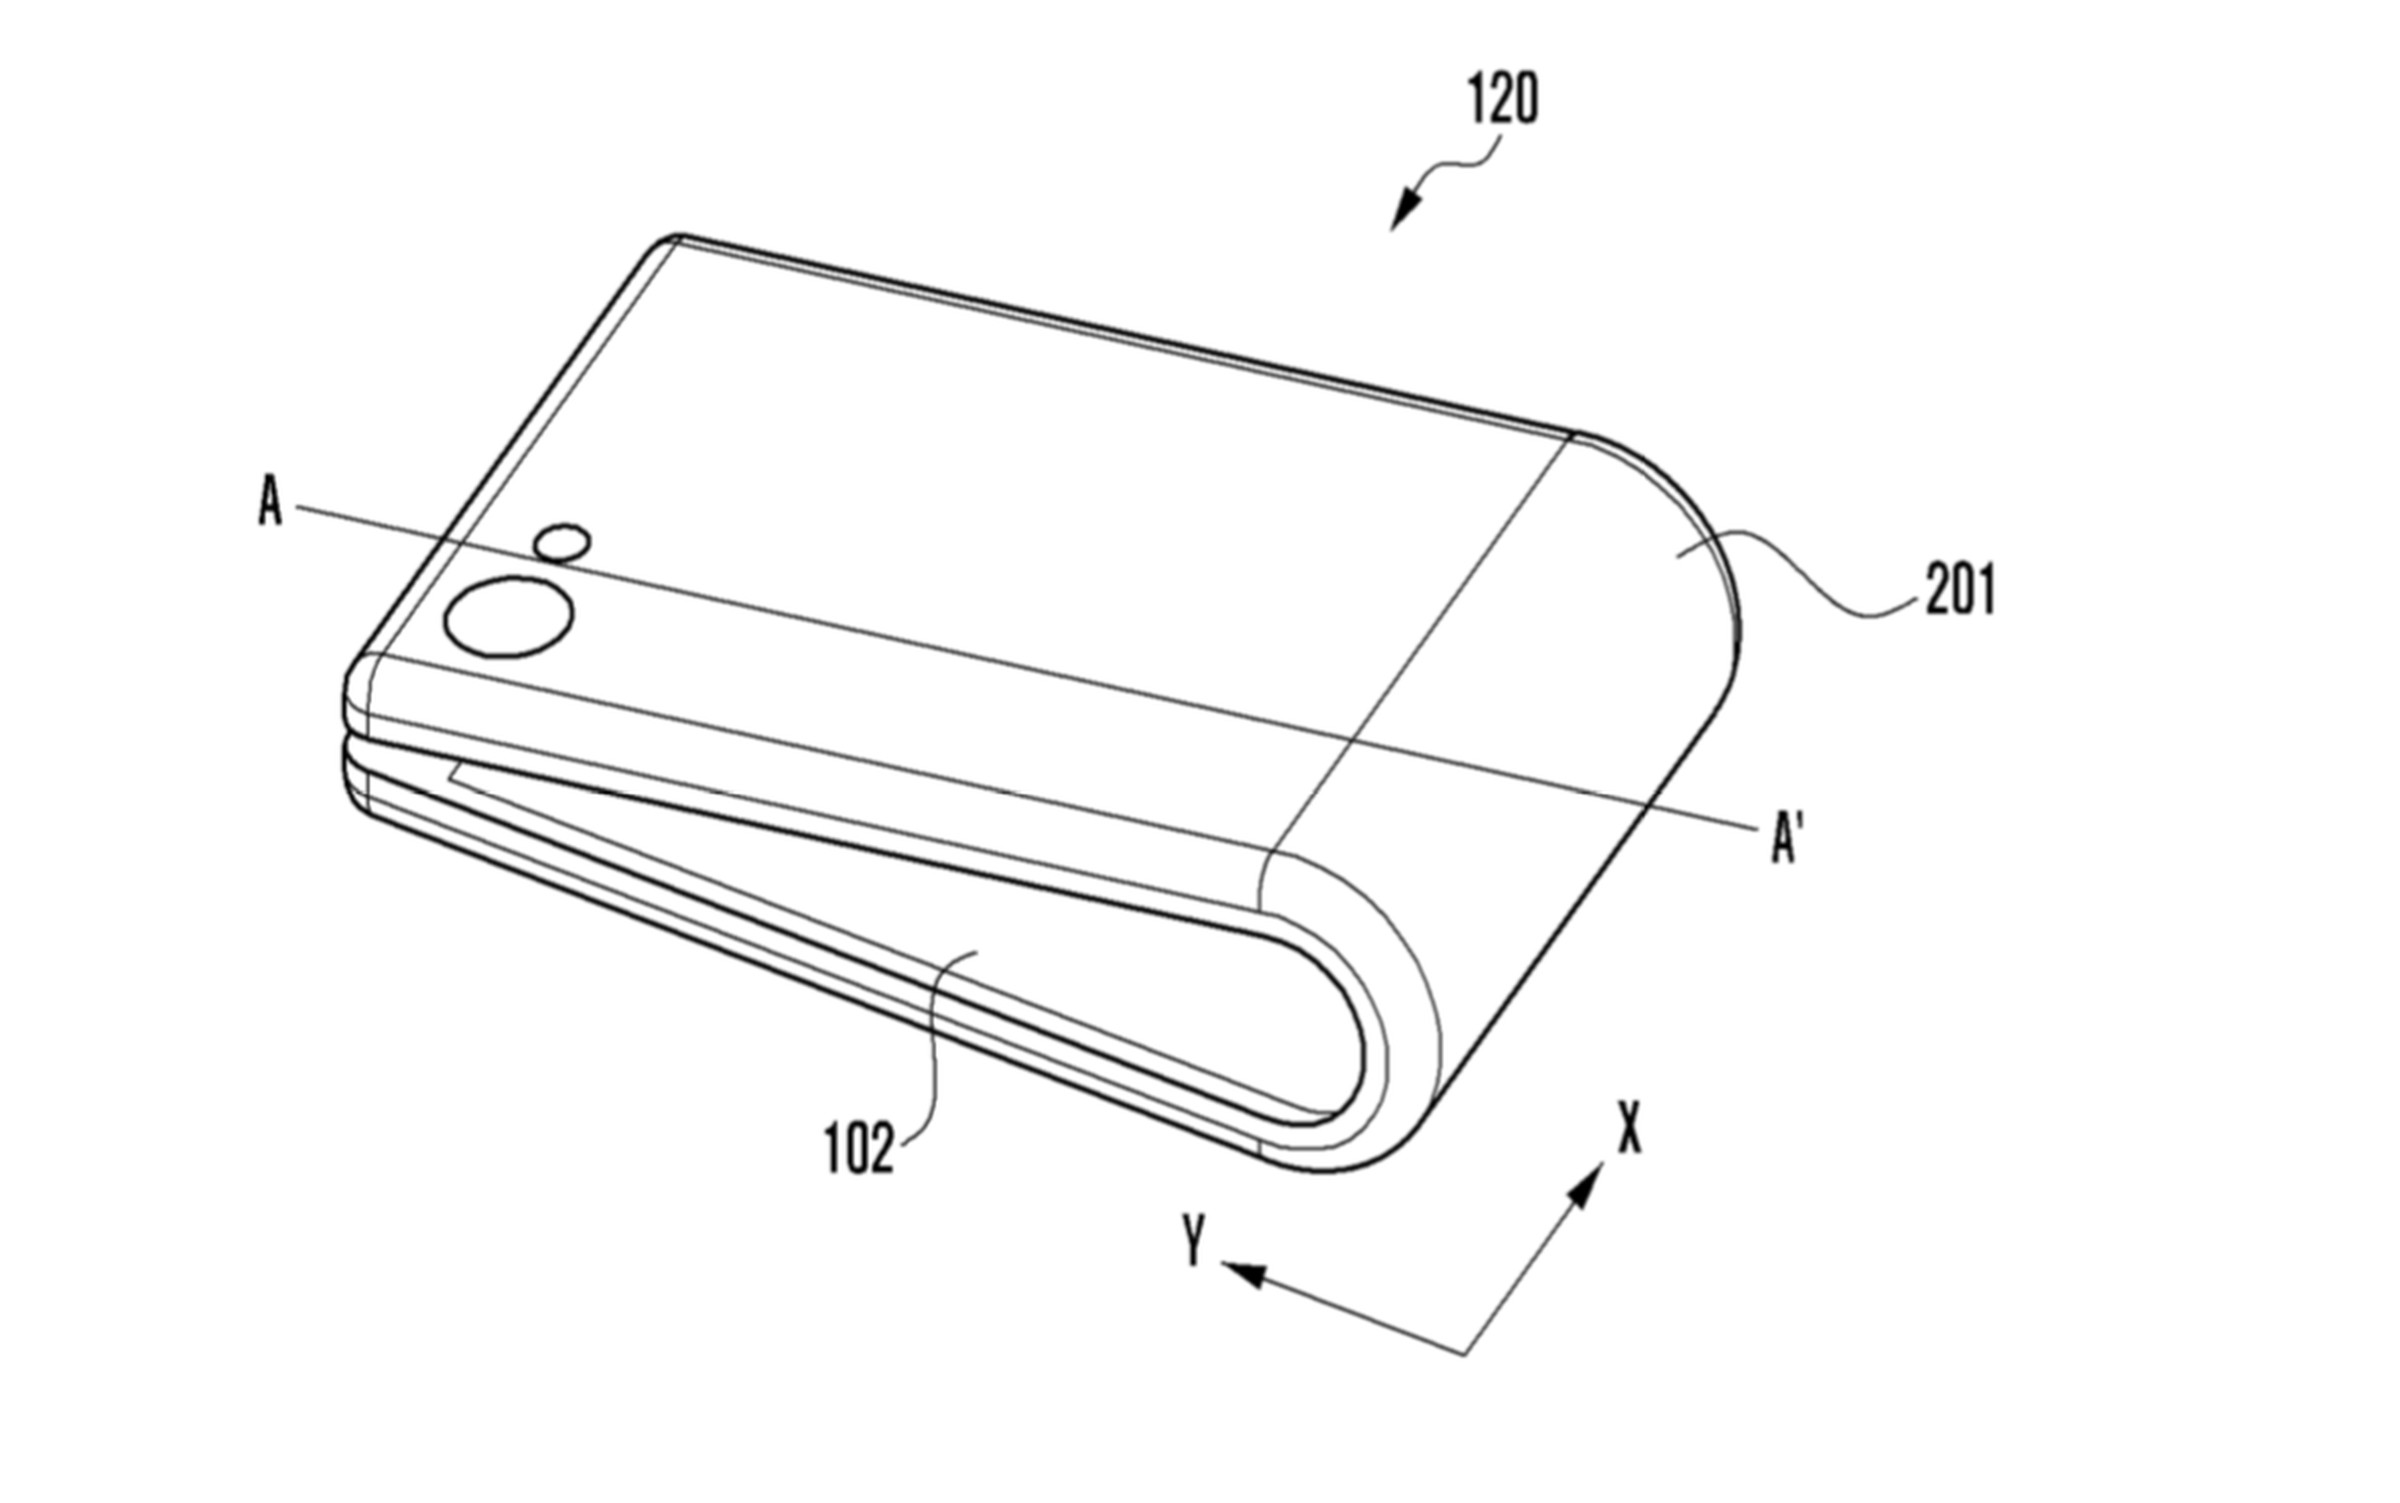 A Samsung bendable phone patent.